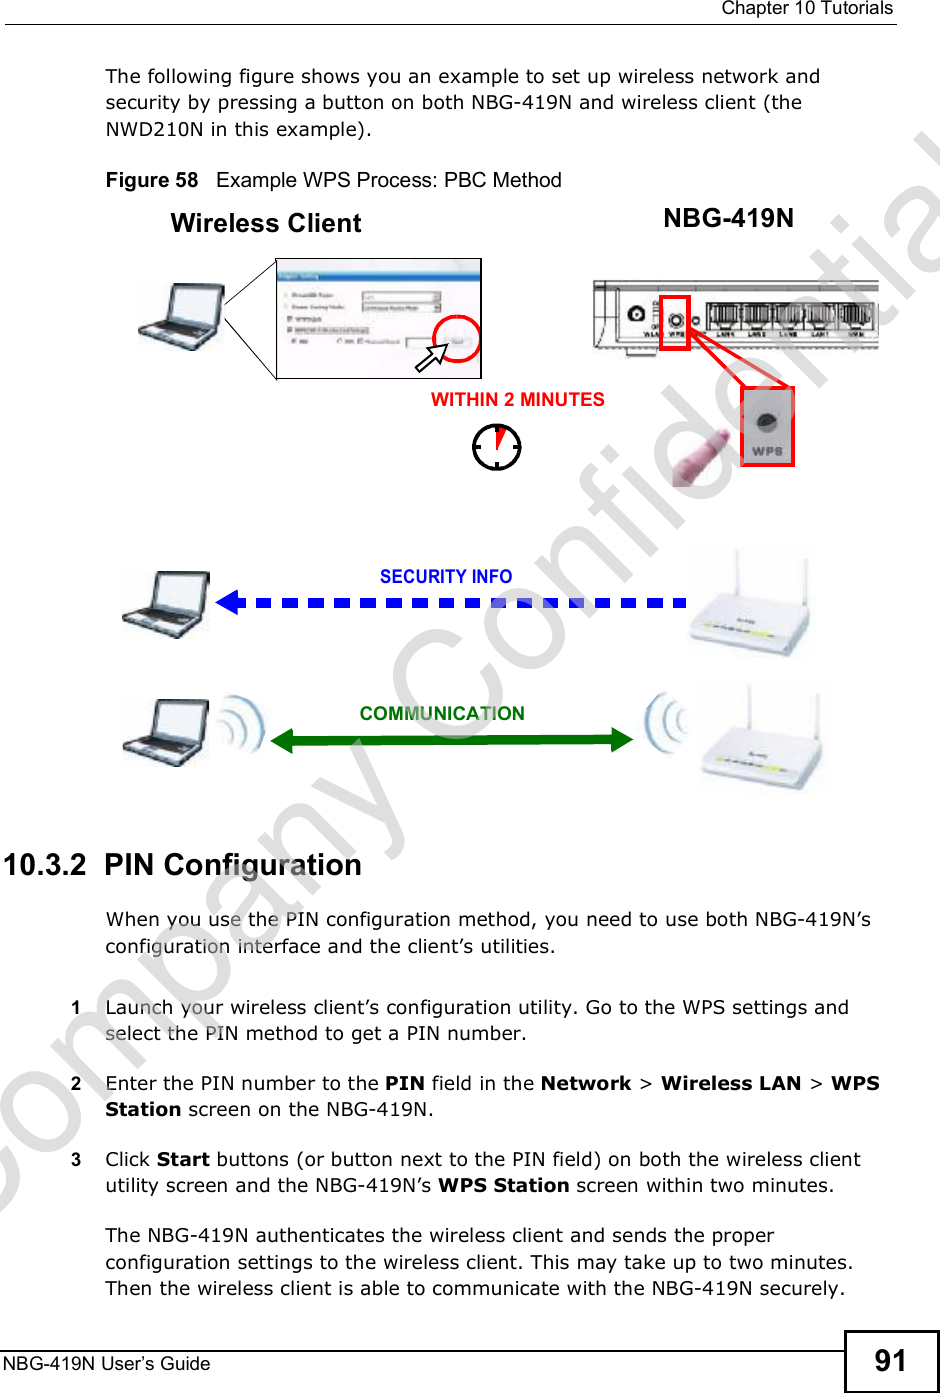  Chapter 10TutorialsNBG-419N User s Guide 91The following figure shows you an example to set up wireless network and security by pressing a button on both NBG-419N and wireless client (the NWD210N in this example).Figure 58   Example WPS Process: PBC Method10.3.2  PIN ConfigurationWhen you use the PIN configuration method, you need to use both NBG-419N!s configuration interface and the client!s utilities.1Launch your wireless client!s configuration utility. Go to the WPS settings and select the PIN method to get a PIN number.2Enter the PIN number to the PIN field in the Network &gt; Wireless LAN &gt; WPS Station screen on the NBG-419N.3Click Start buttons (or button next to the PIN field) on both the wireless client utility screen and the NBG-419N!s WPS Station screen within two minutes.The NBG-419N authenticates the wireless client and sends the proper configuration settings to the wireless client. This may take up to two minutes. Then the wireless client is able to communicate with the NBG-419N securely. Wireless Client    NBG-419NSECURITY INFOCOMMUNICATIONWITHIN 2 MINUTESCompany Confidential